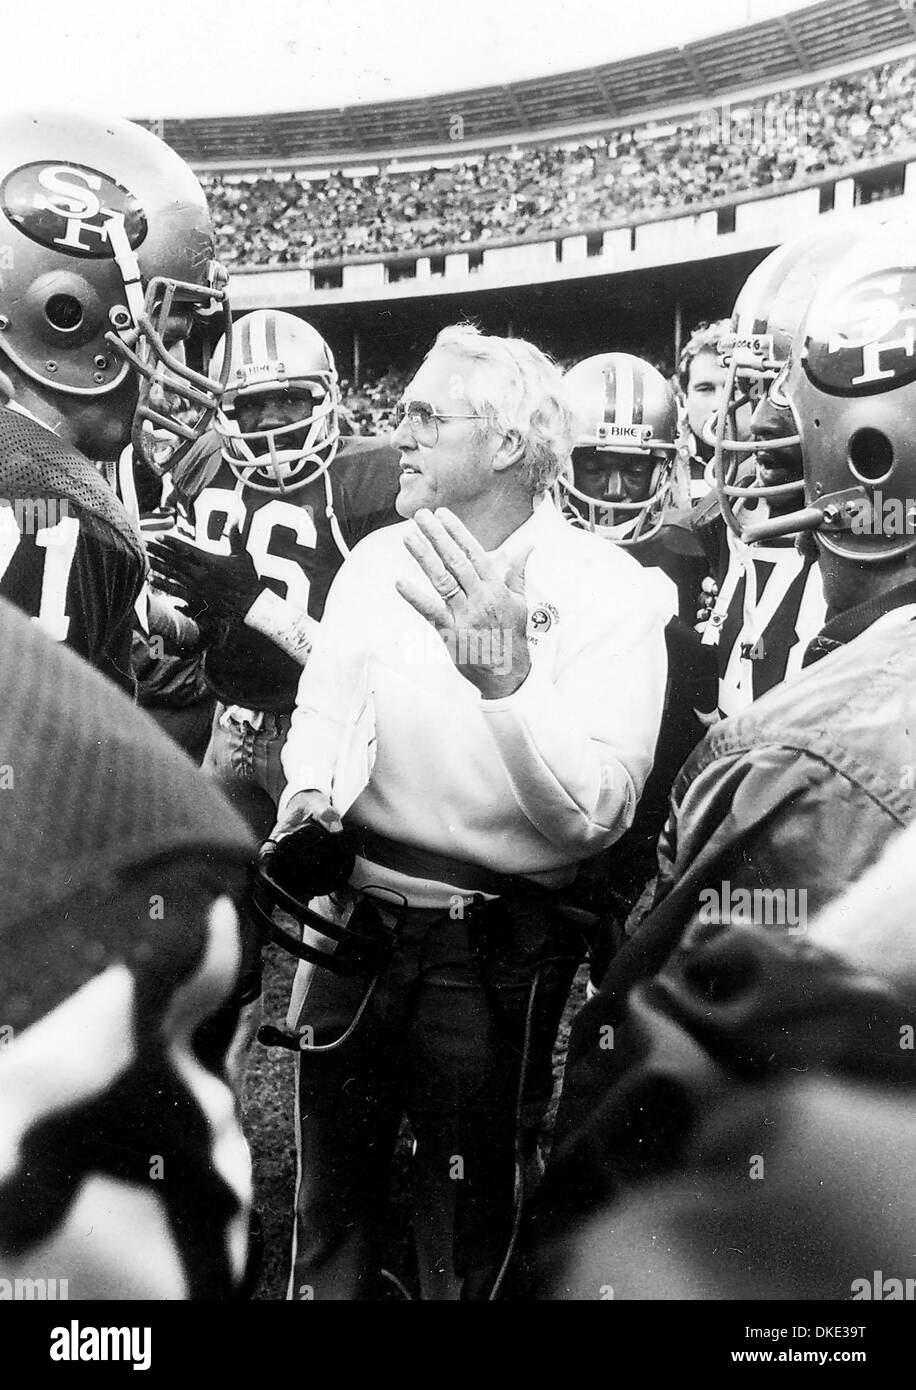 WILLIAM ERNEST WALSH (November 30, 1931 – July 30, 2007), one of the greatest football coaches of all time. Bill Walsh, the inventor of the West Coast Offense, died at the age of 75, following a long battle with leukemia. Walsh, guided the San Francisco 49ers to three Super Bowl championships and six NFC West division titles in his 10 years as head coach. Walsh didn't become an NFL Stock Photo